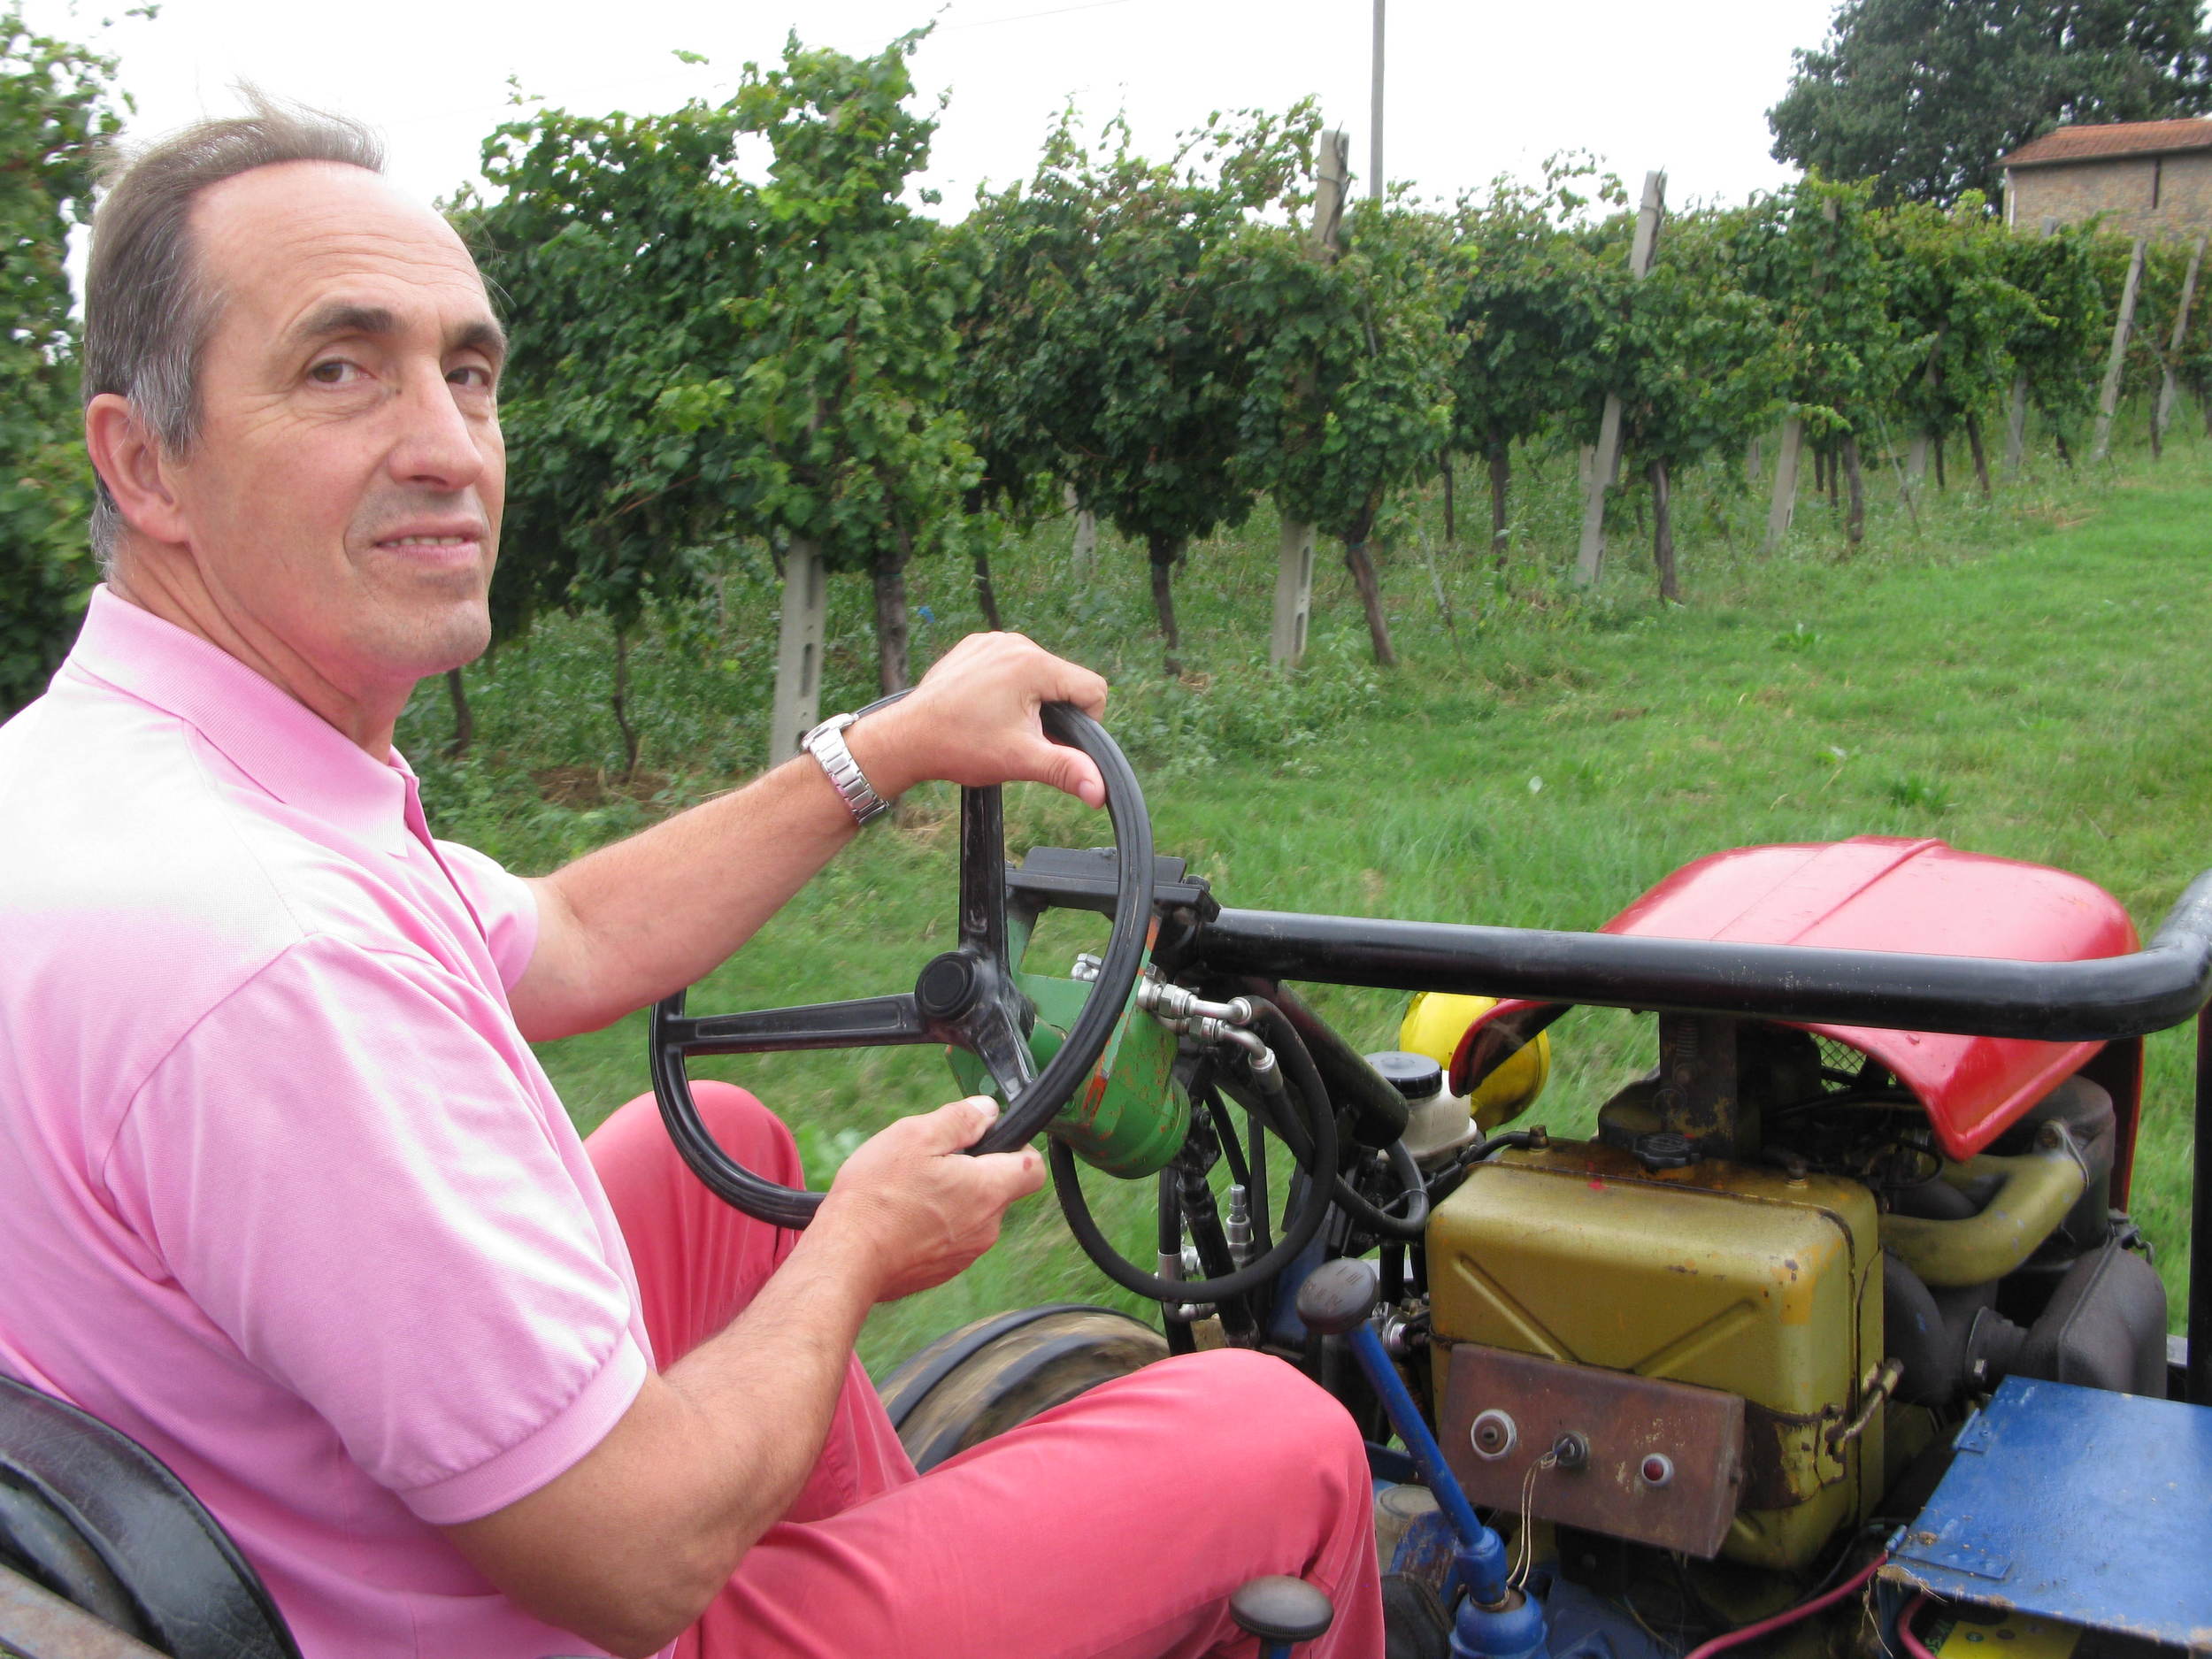 Luciano Monti has been working the vineyards since he was 14